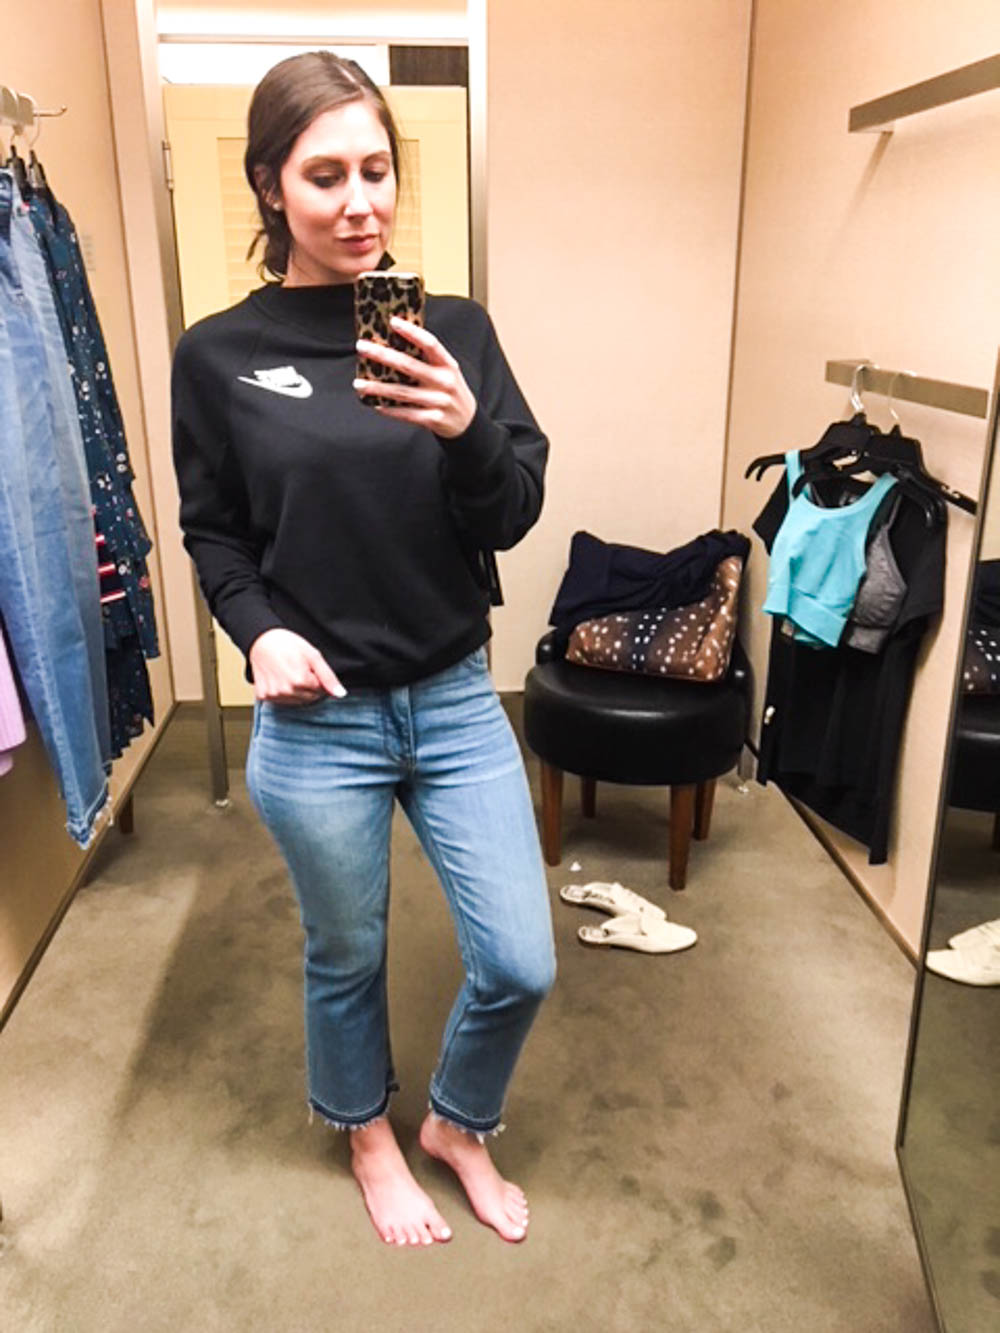 Nordstrom Anniversary Sale- What I Bought